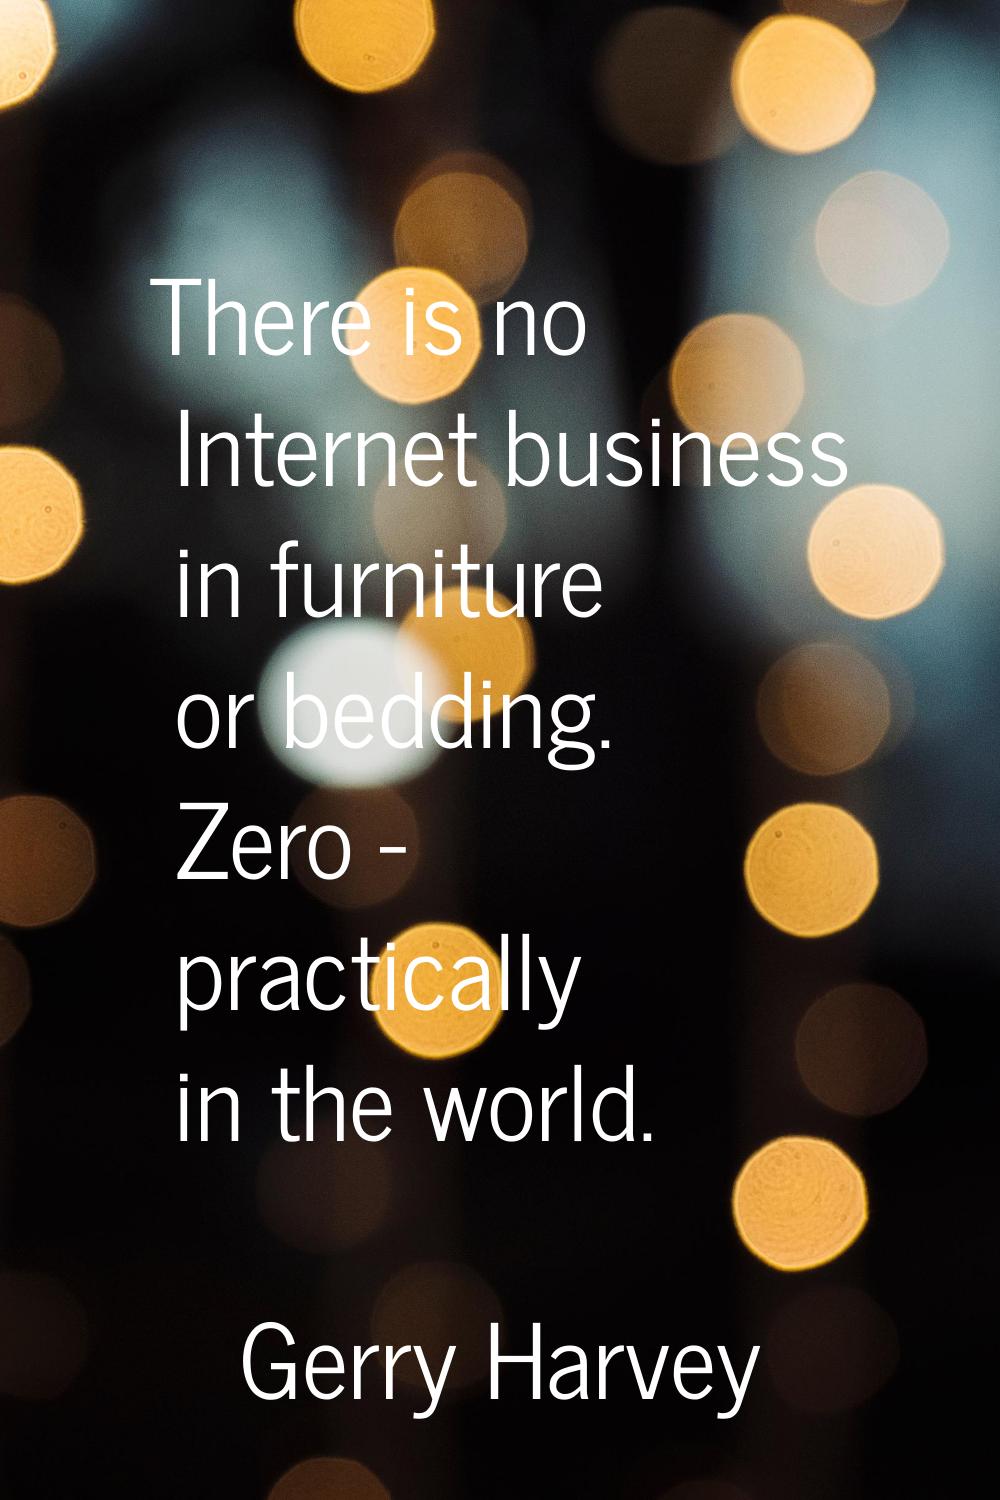 There is no Internet business in furniture or bedding. Zero - practically in the world.